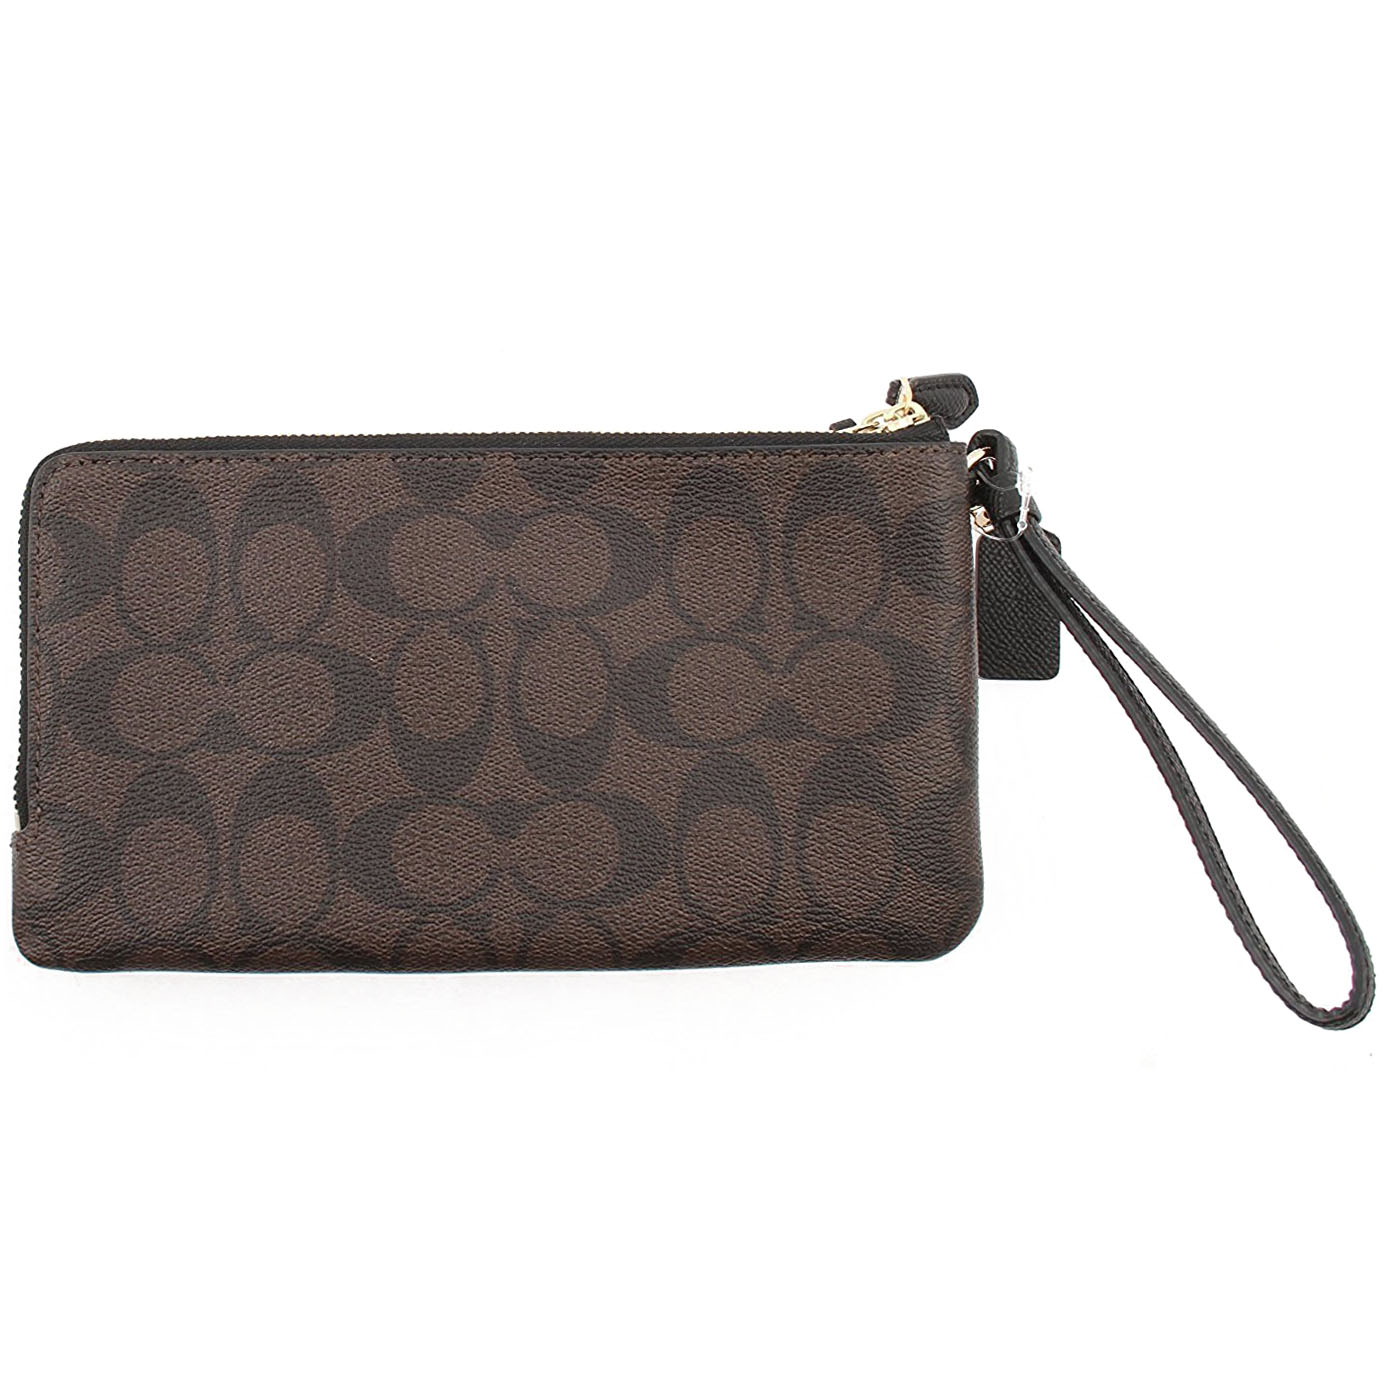 Coach Large Double Zip Wallet In Signature Coated Canvas Large Wristlet Black / Brown # F16109